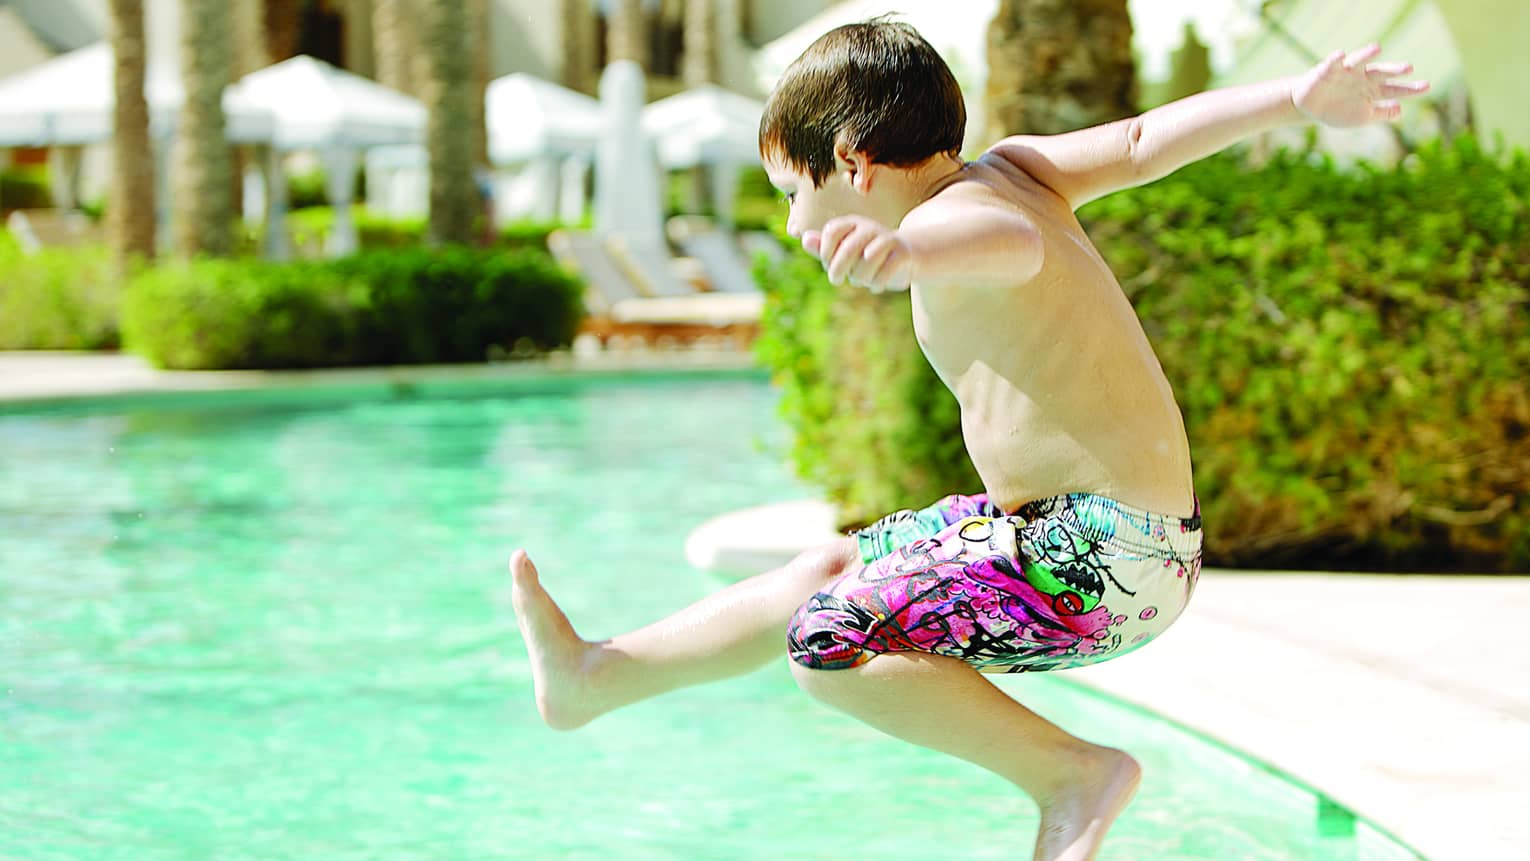 Boy wearing swim shorts jumps into sunny outdoor swimming pool